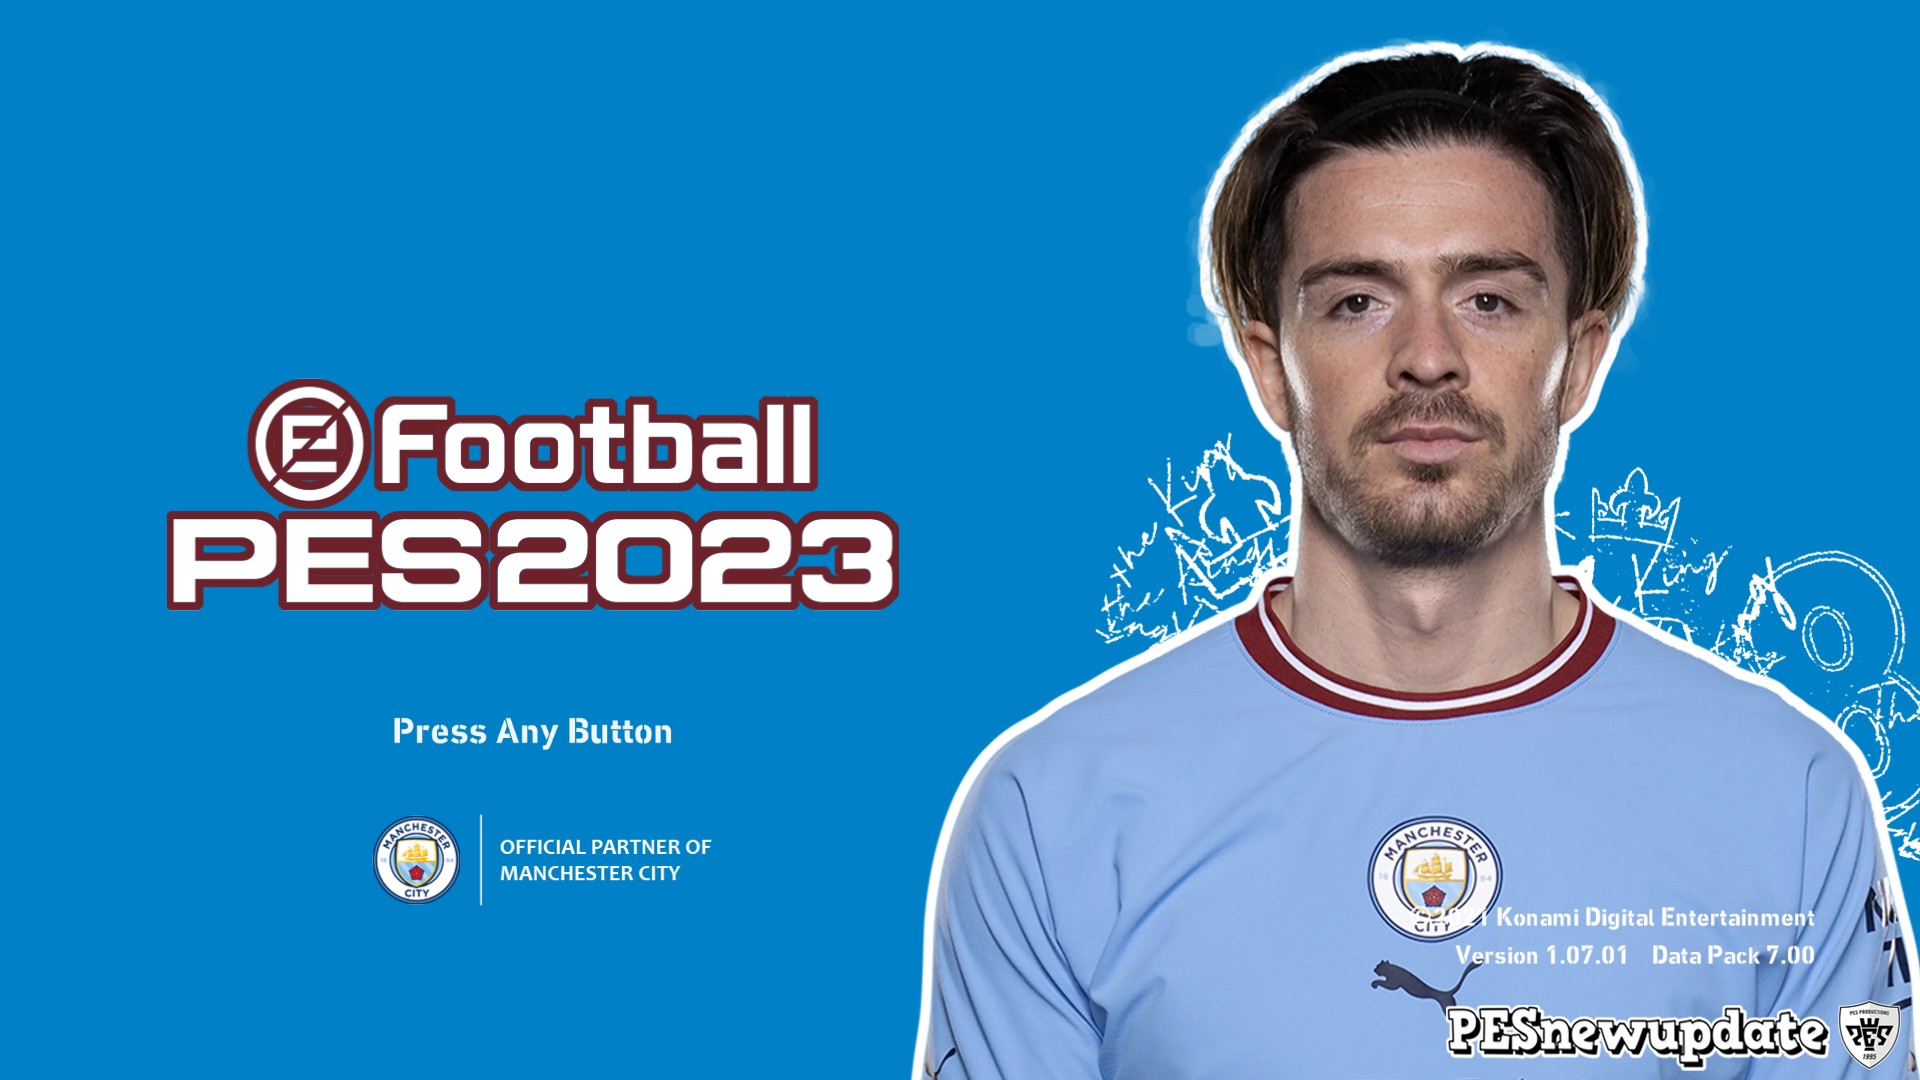 PES 2021 Menu Manchester City 2022 2023 By PESNewupdate PESNewupdate.com. Free Download Latest Pro Evolution Soccer Patch & Updates